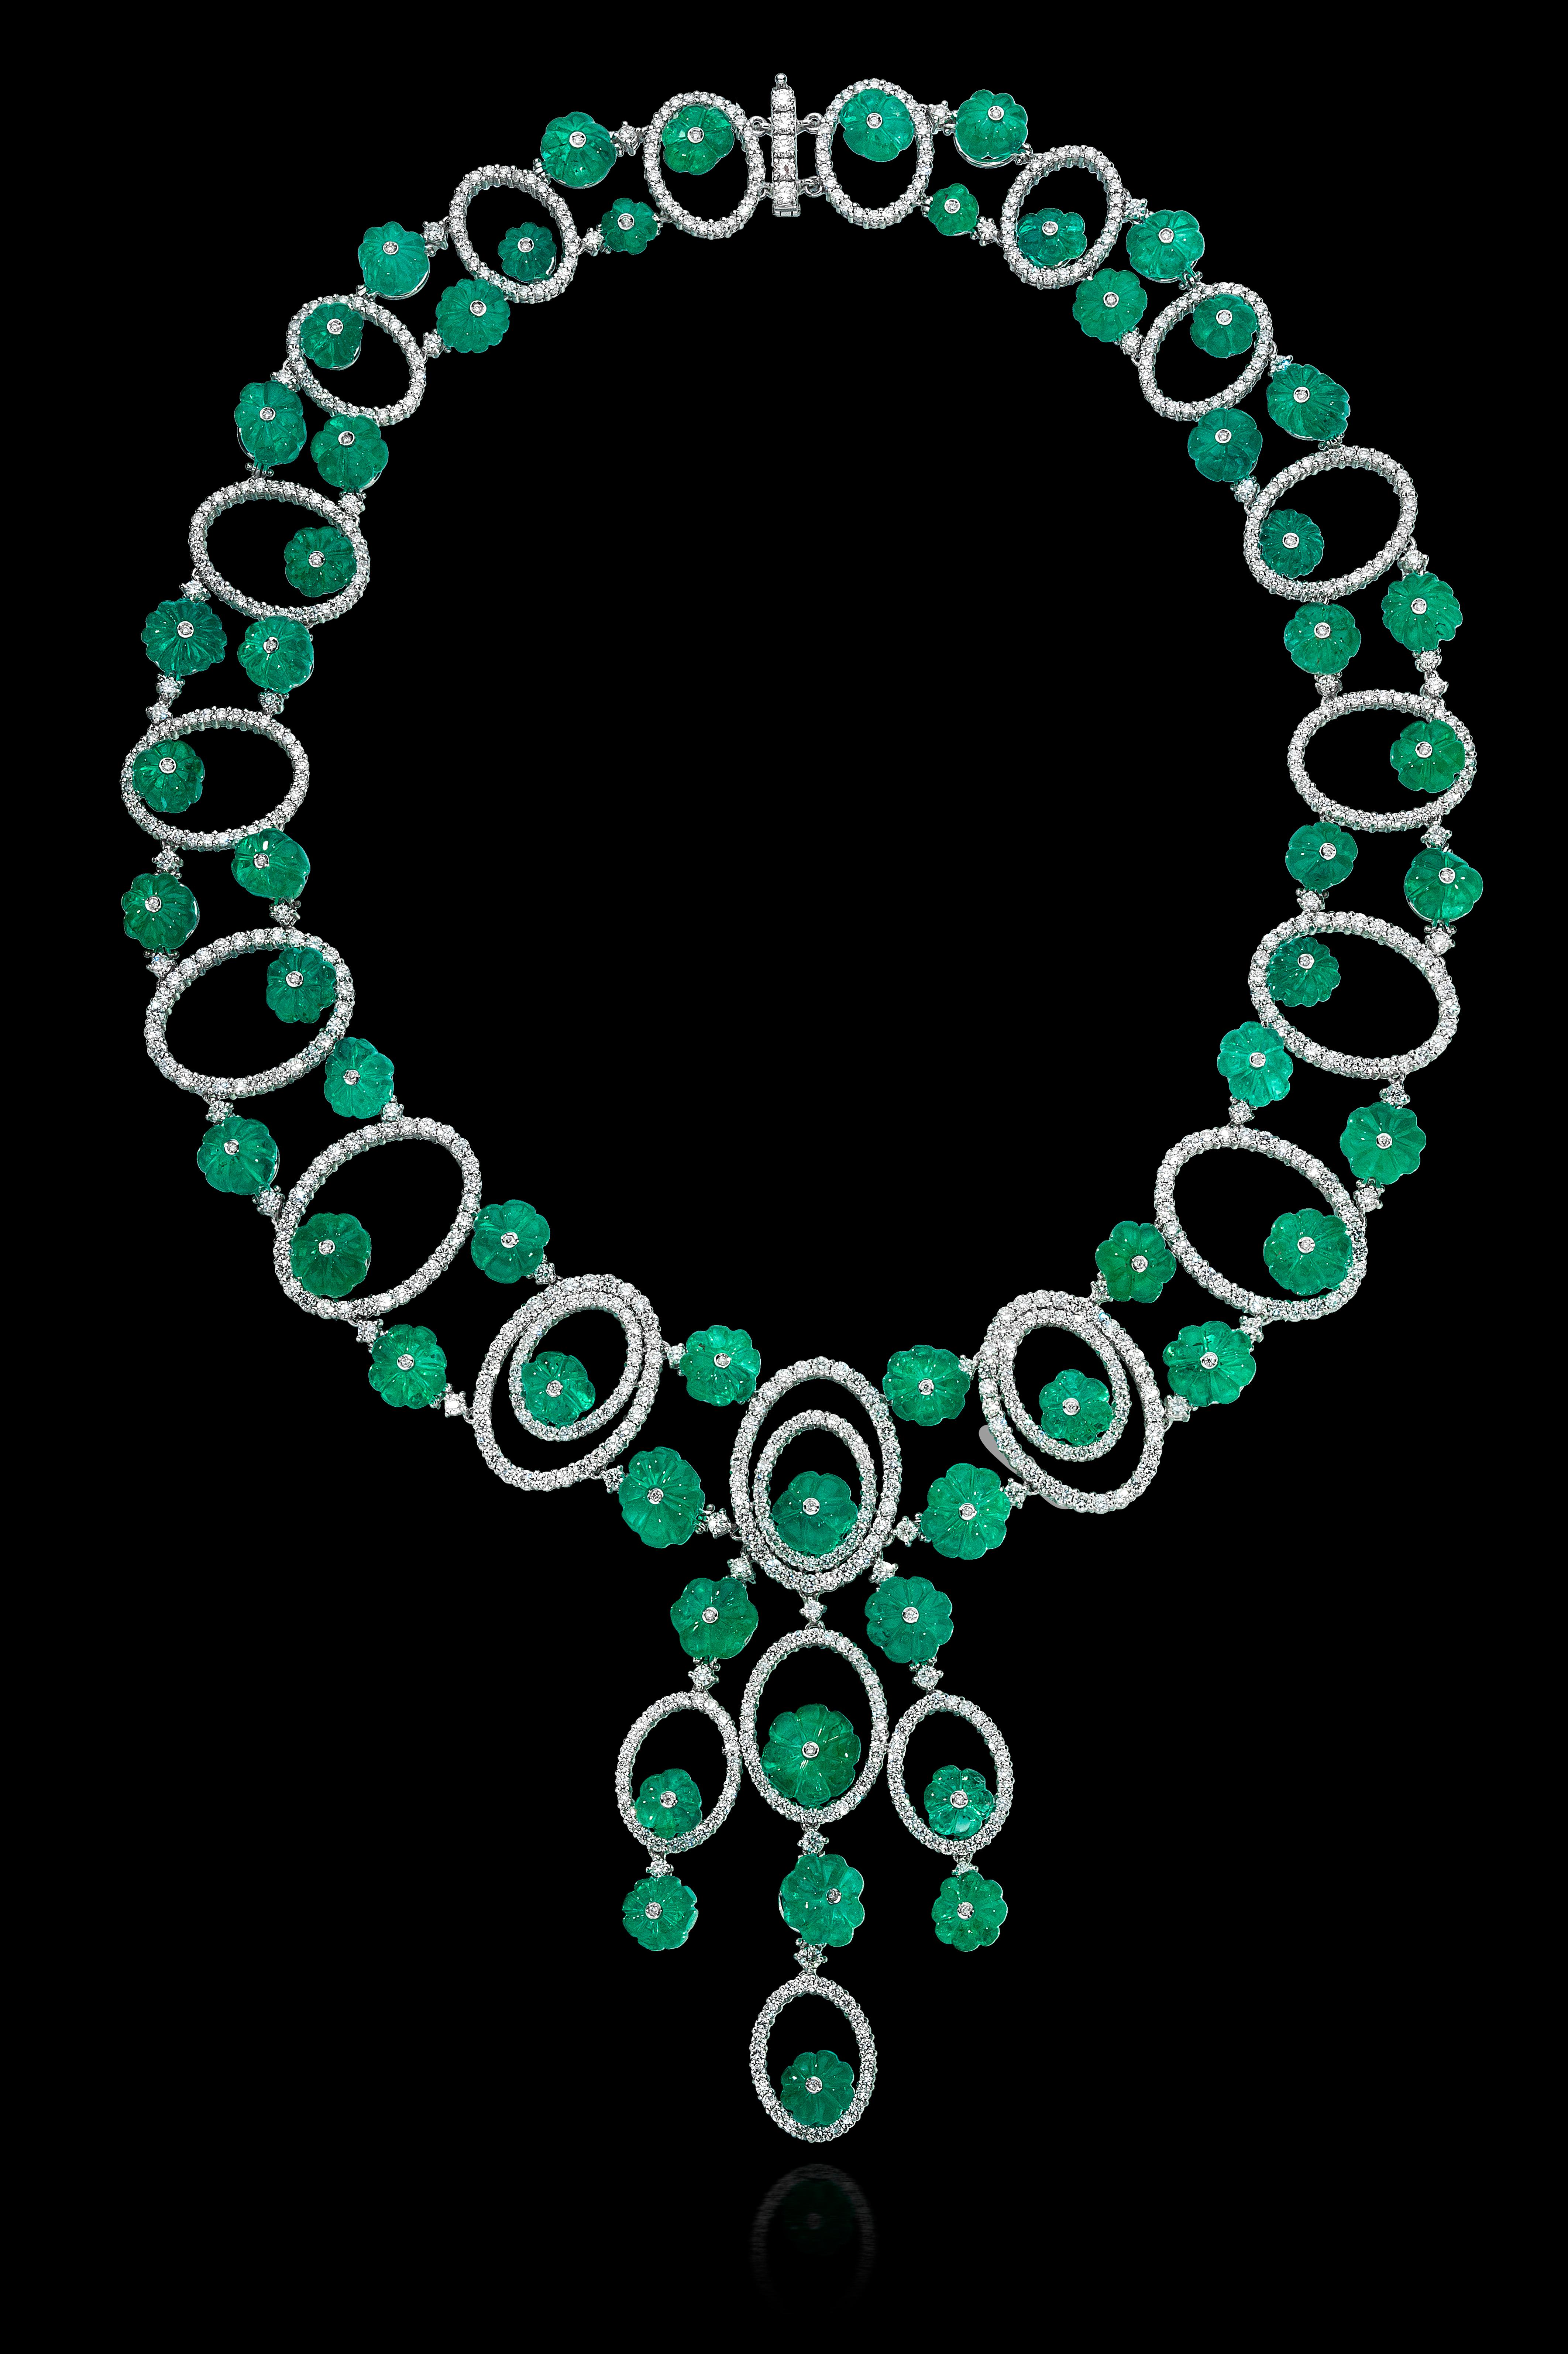 Andreoli Carved Colombian Emerald Melon Diamond Necklace Sphere Drop 18KT Gold

This Andreoli Masterpiece is surrounded by 21.56 carate of full round cut brilliant diamonds F/G/H Color VS-SI Clarity. There are 199.37 carats of Vivid Green Colombian